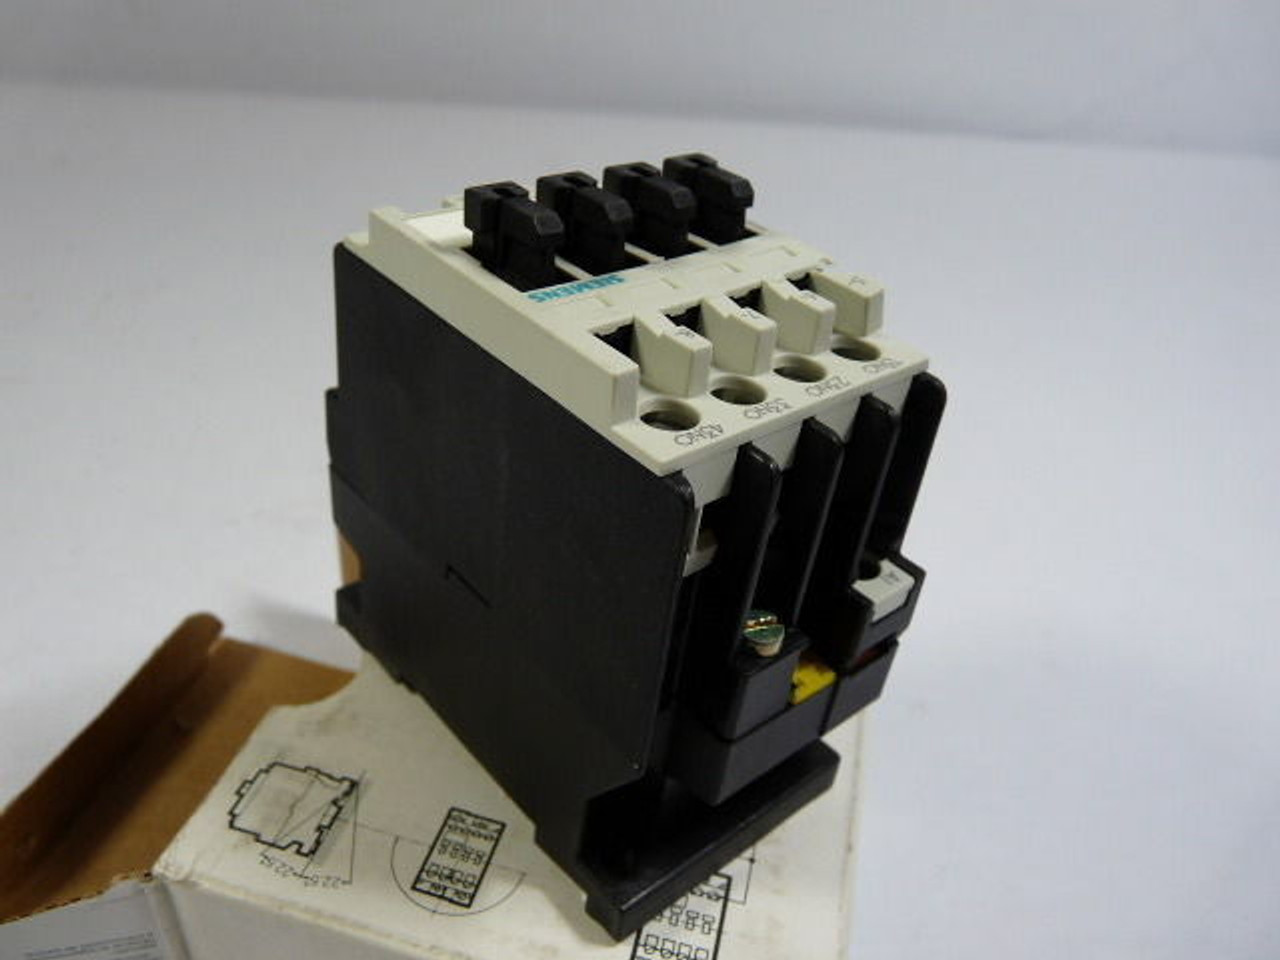 Siemens 3TH30-40-0AK6 Contactor 10 Amp 110/120V ! NEW !